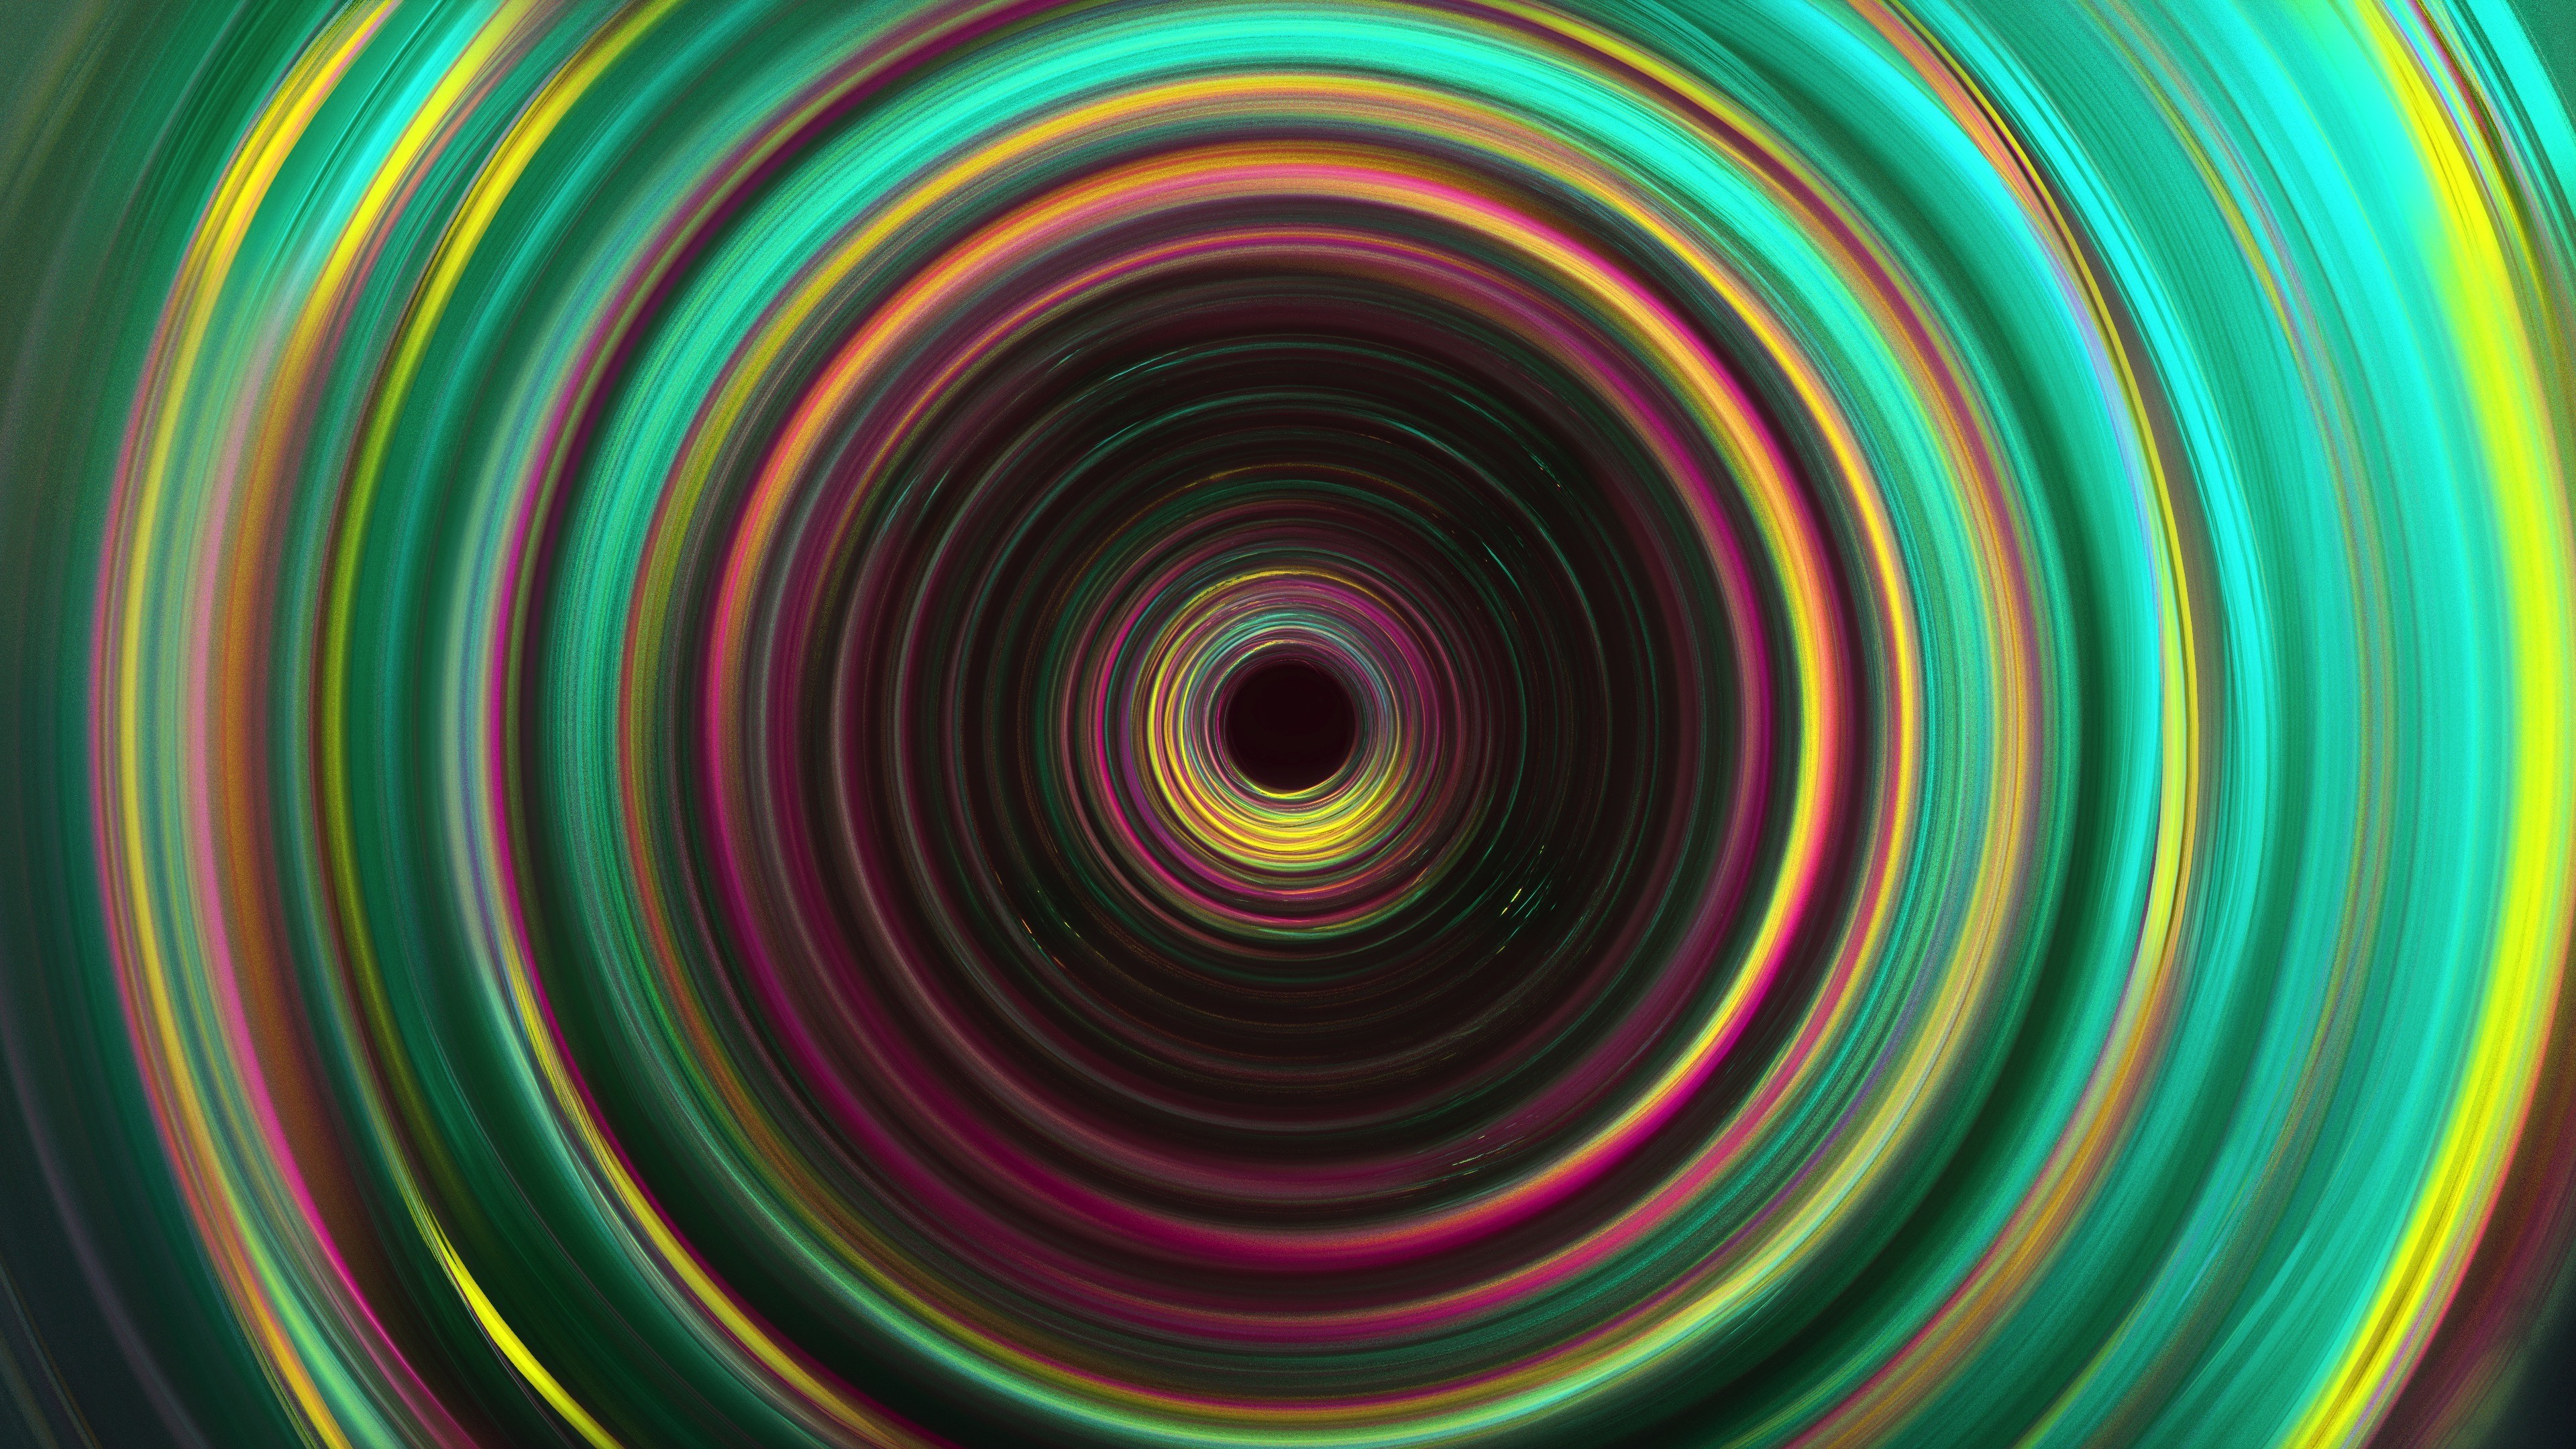 Desktop Wallpaper Multi Colors, Abstract, Glowing Circles, 4k, HD Image, Picture, Background, 3bb91b